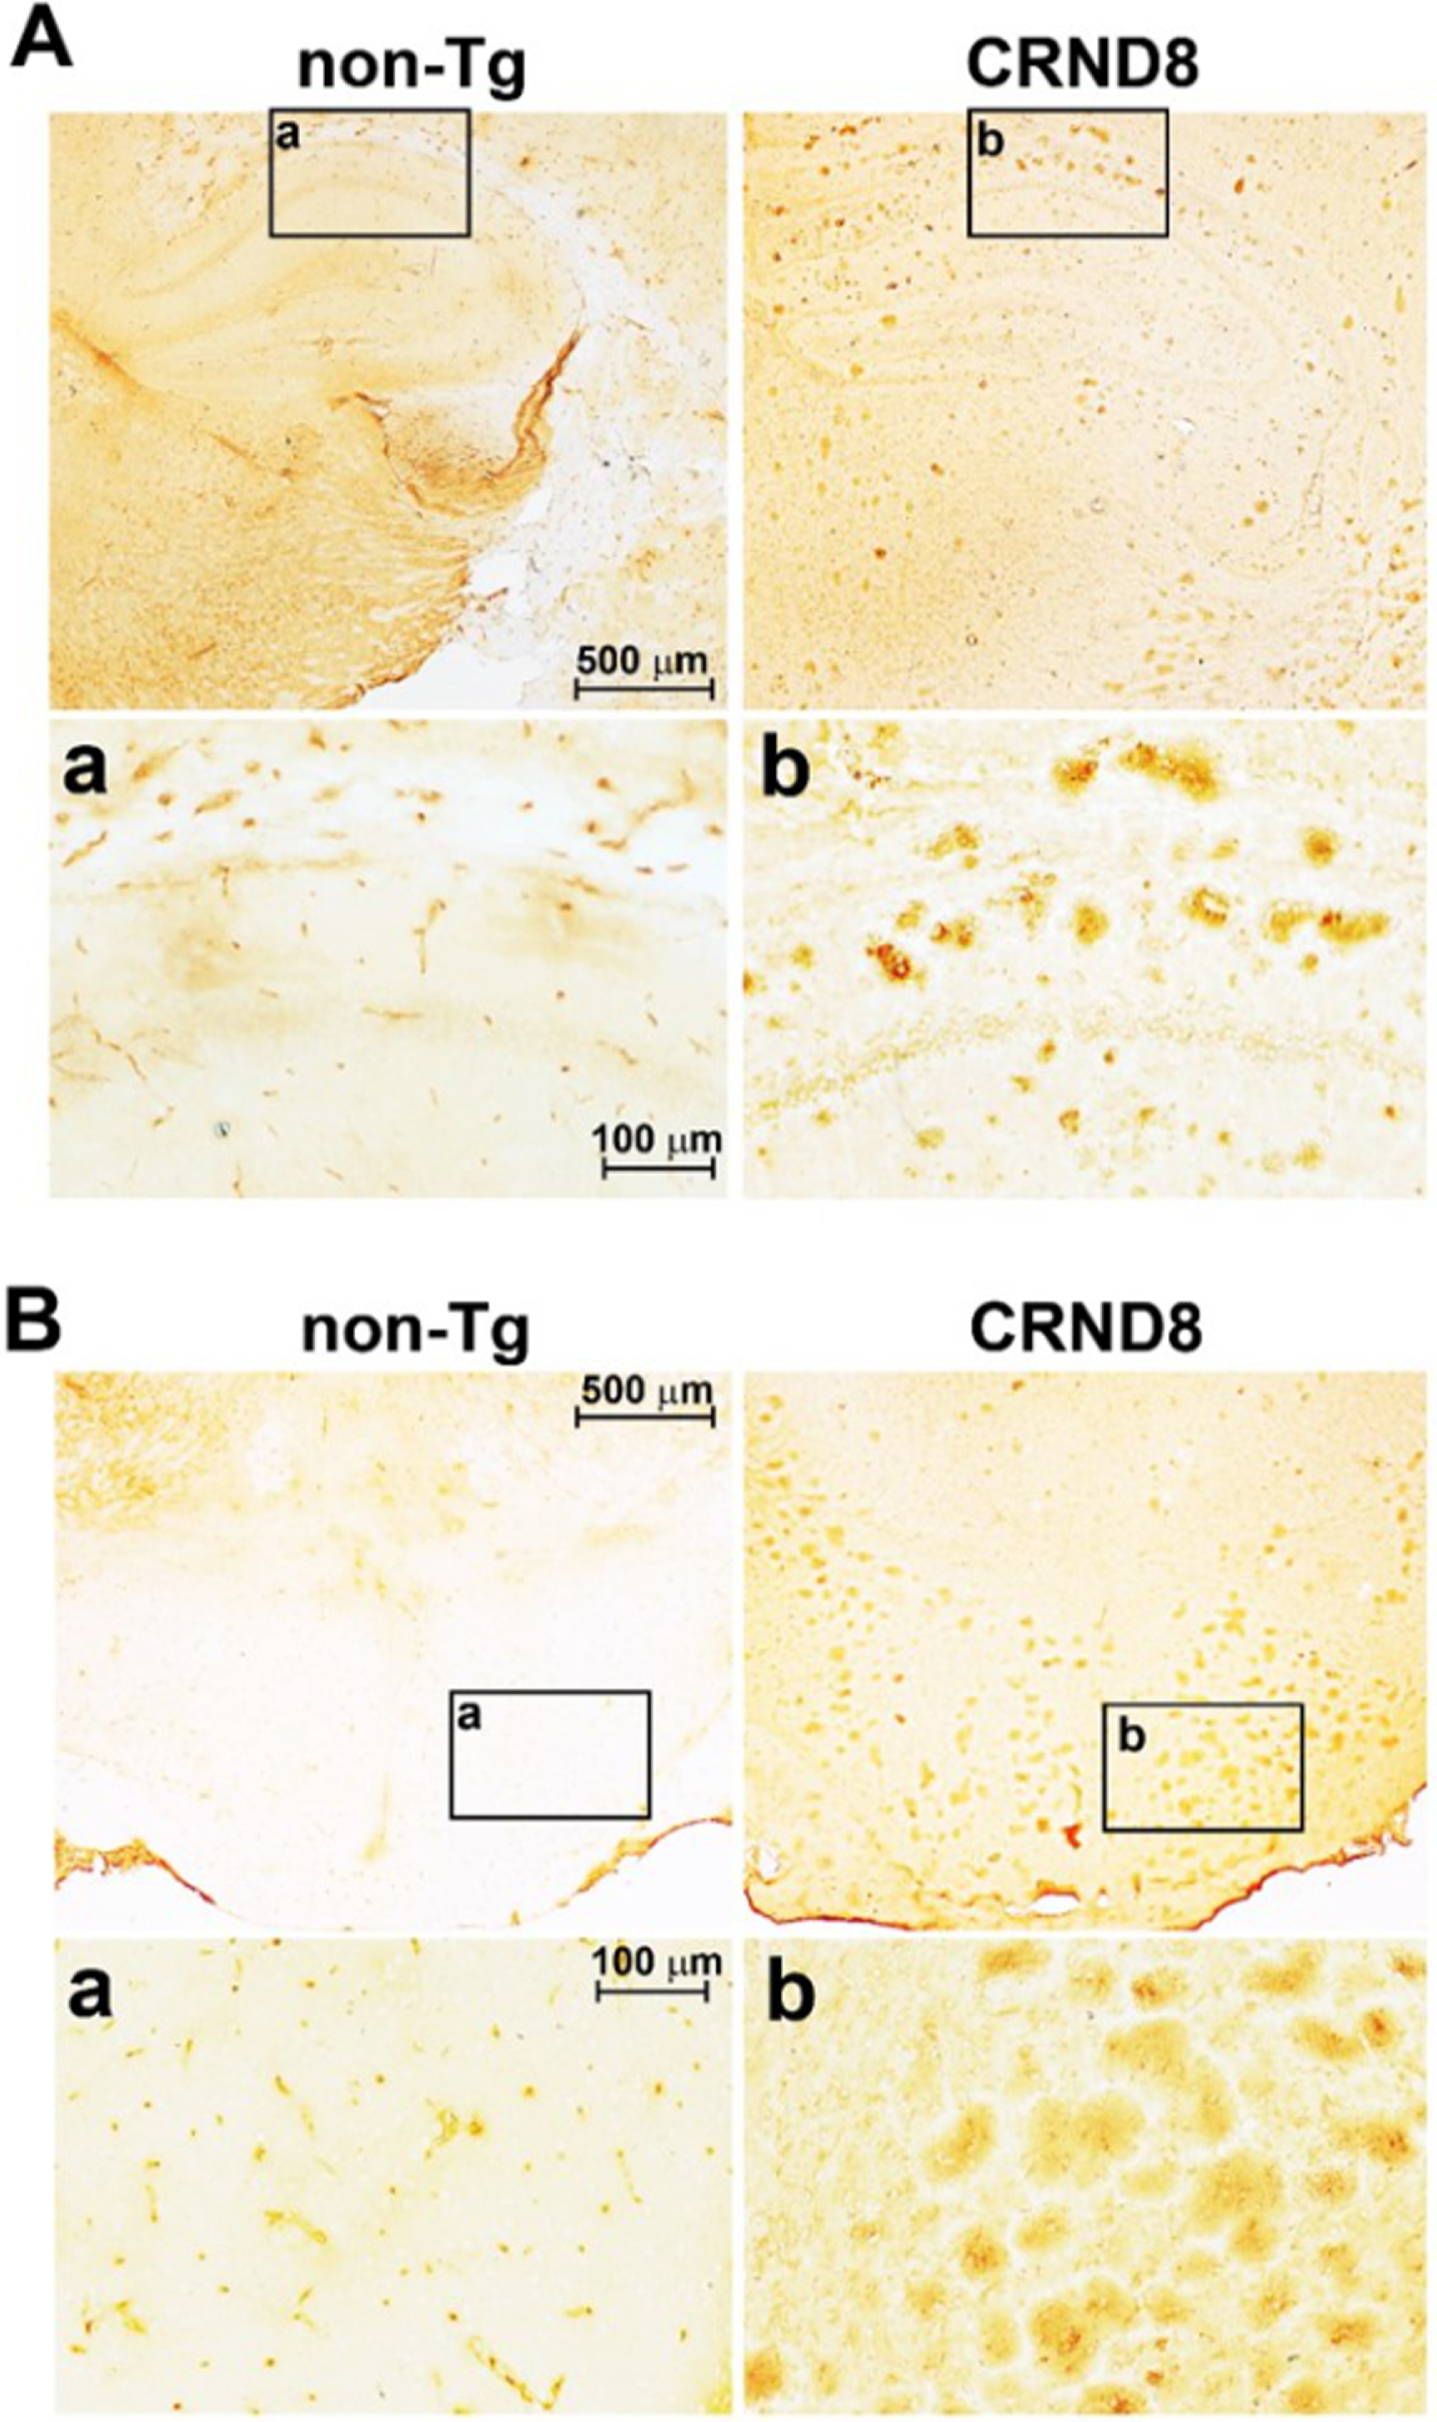 Aβ plaques were clearly visible in the brain of CRND8 mice. Representative histological sections of CRND8 and non-Tg brains stained with 6E10 antibody. In A, Aβ plaques were visible throughout the brain of CRND8 but not non-Tg mice, with a) and b) referring to zoomed-in insets of the hippocampus in non-Tg and CRND8 mice, respectively. In B, brain slices containing the hypothalamus were imaged at low magnification, with a) and b) referring to zoomed-in insets of the hypothalamus in non-Tg and CRND8 mice, respectively.